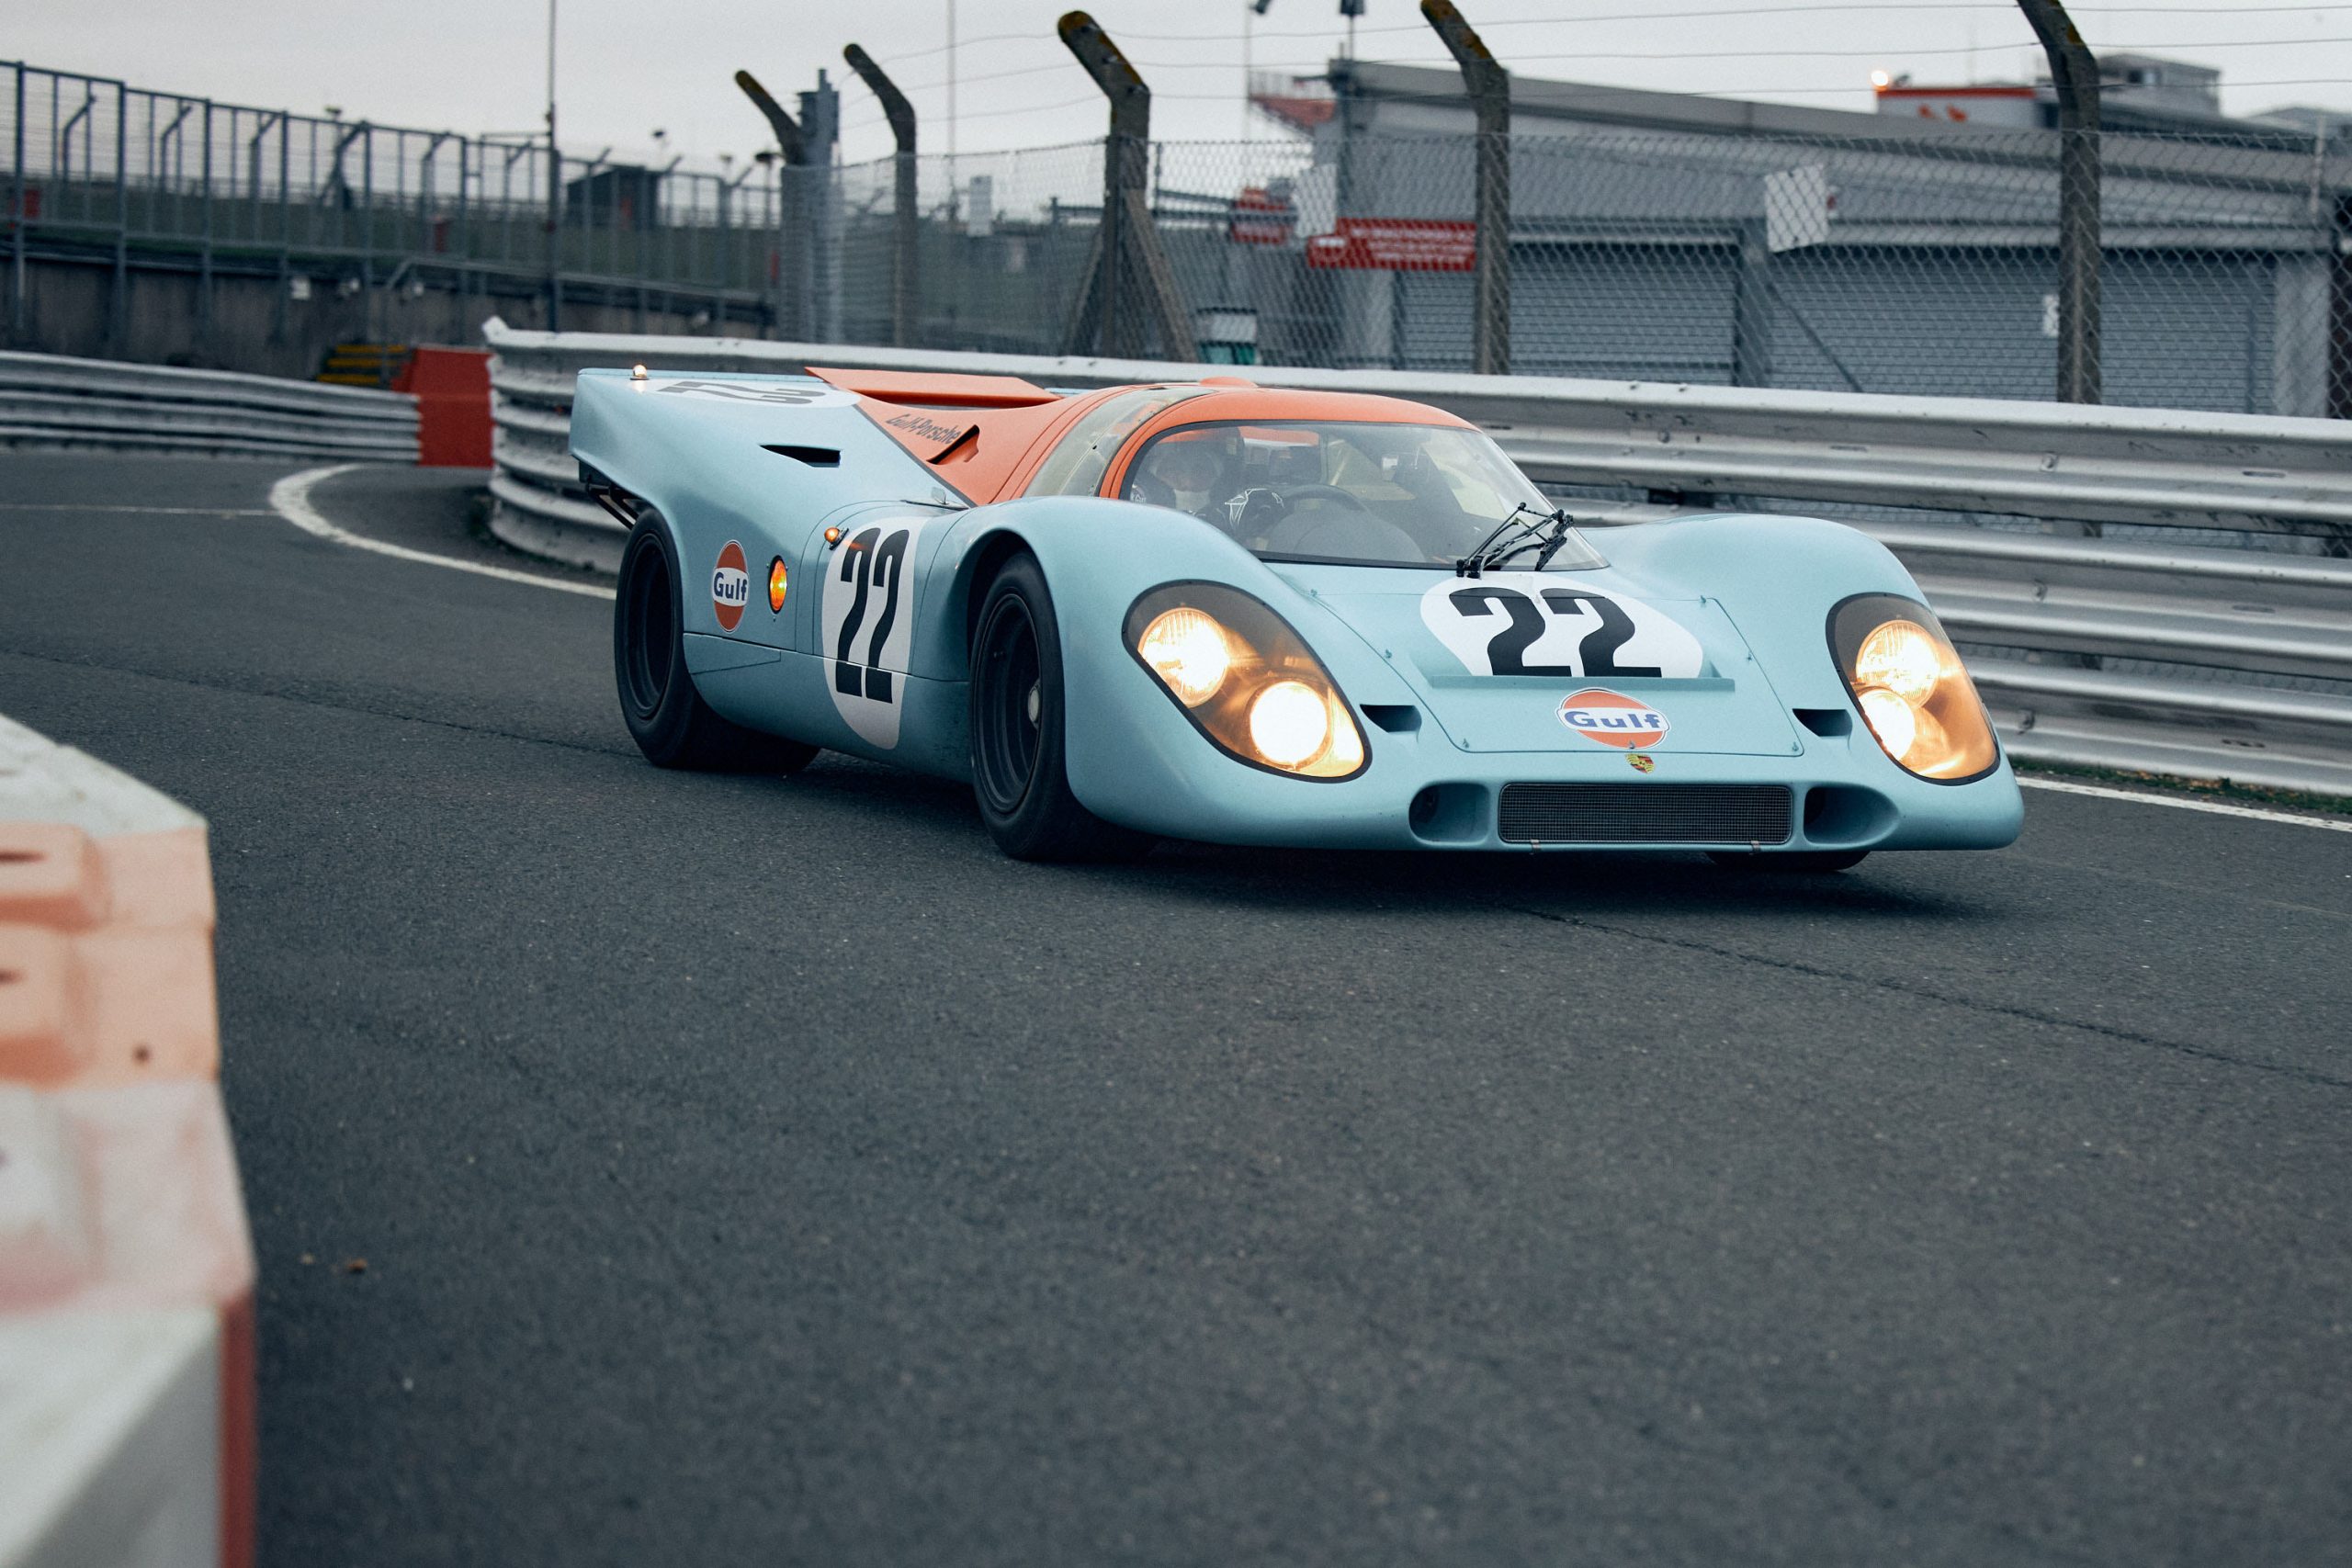 Will this Porsche 917K Le Mans veteran set a new world record at auction?